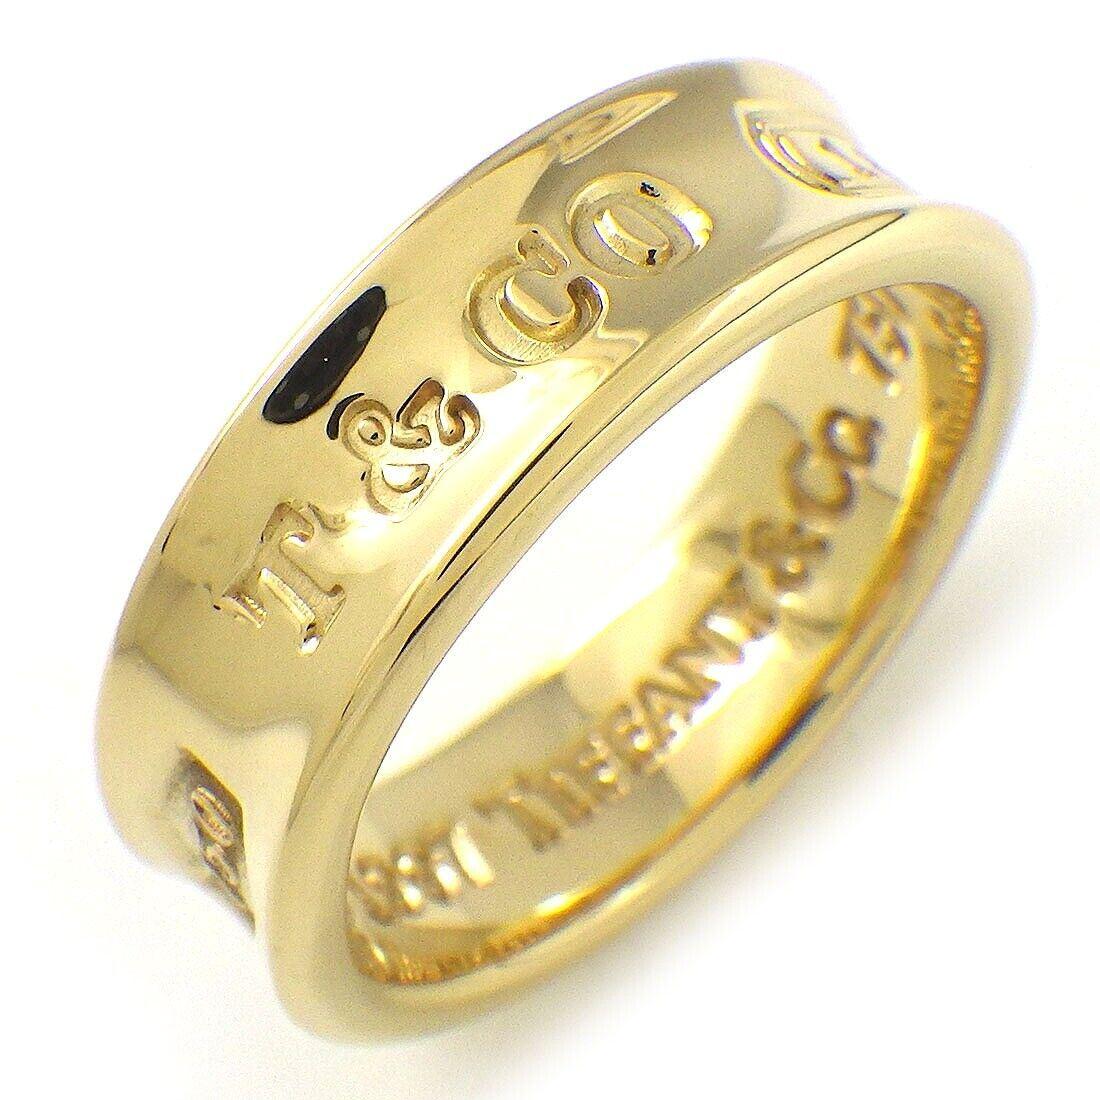 TIFFANY & Co. 1837 18K Gold 6mm Wide Ring 7

Metal: 18K yellow gold 
Size: 7
Band Width: 6mm
Weight: 8.0 grams
Hallmark: 